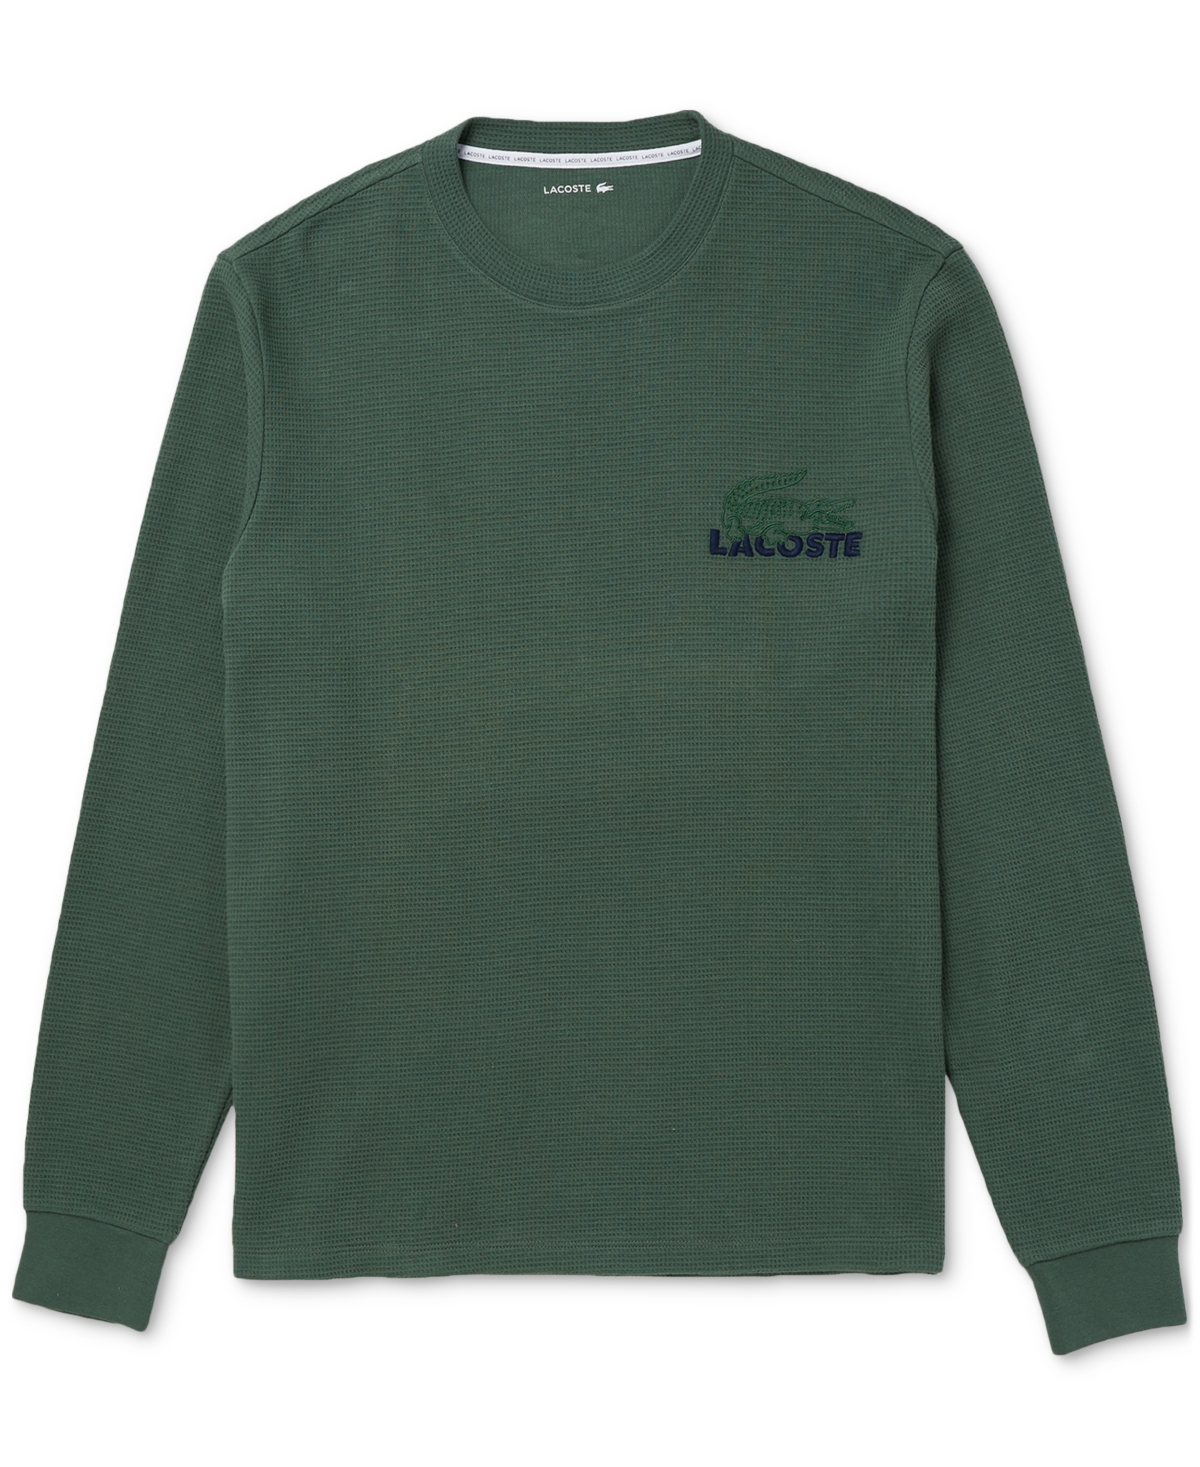 Lacoste Men's Large Croc Thermal Waffle Sleep Shirt In Green